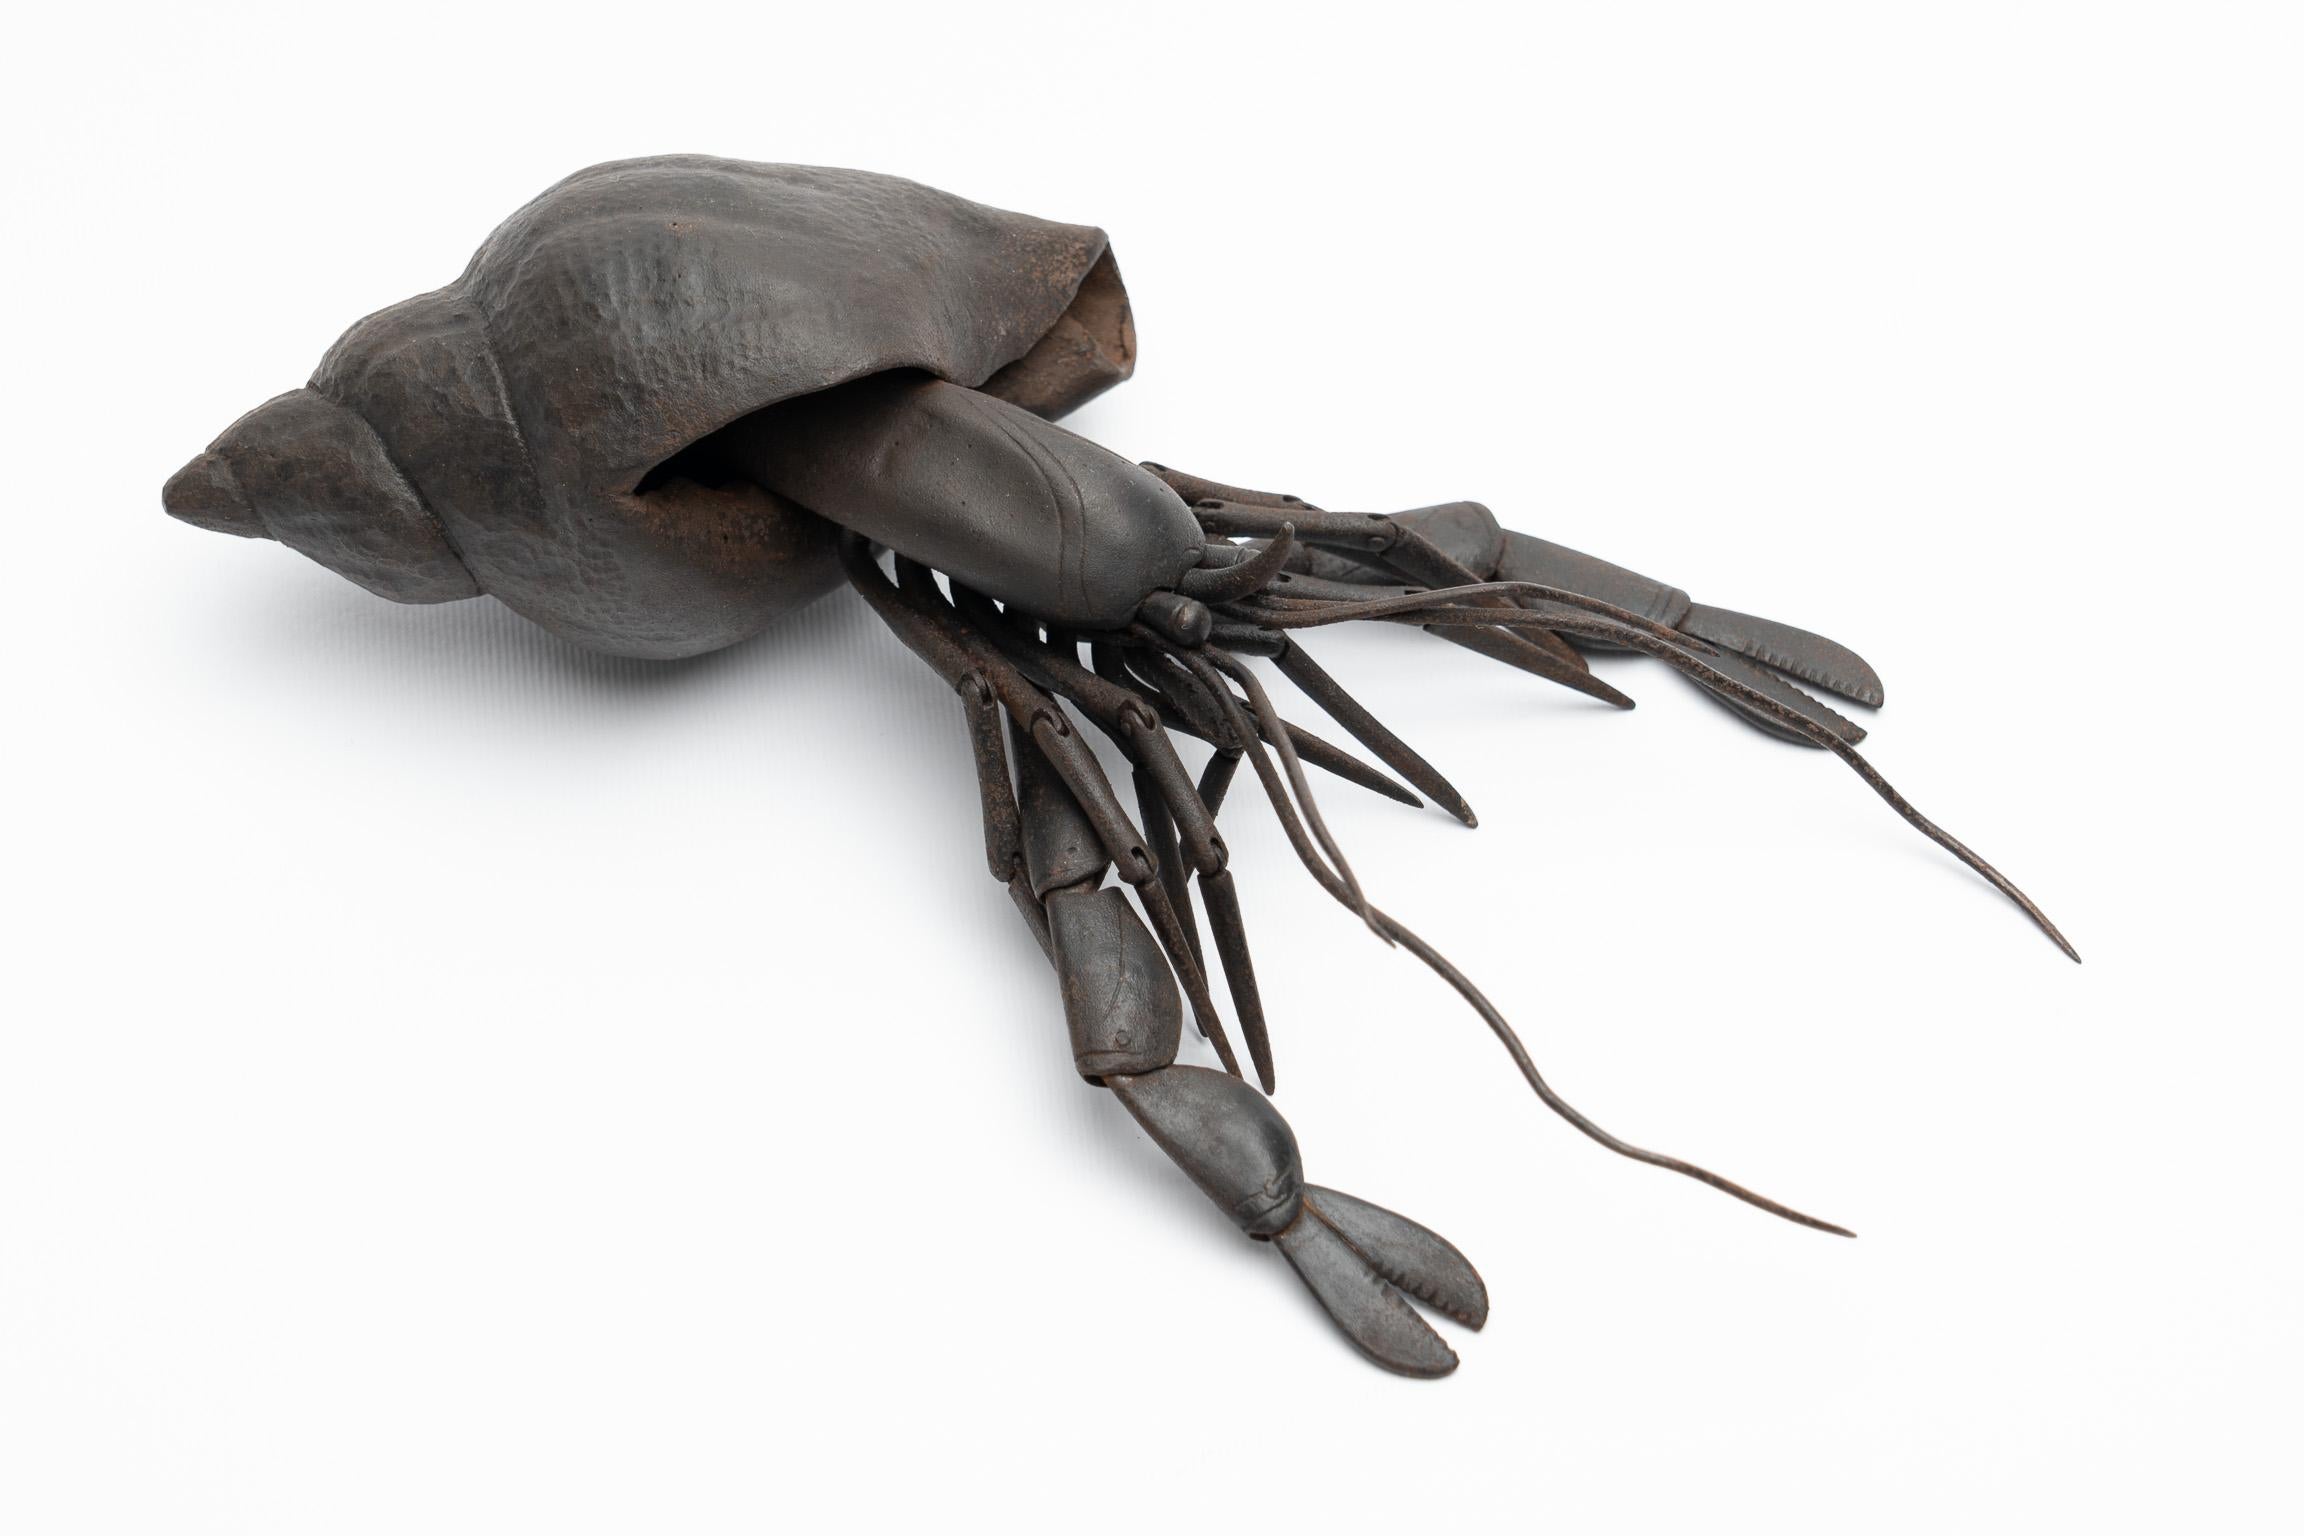 Jizai Okimono
A russet-iron articulated figure of a hermit crab

Myōchin school, Edo Period

18th-19th century

Length: 19.5 cm

 

With a large, realistically rendered, spiralling top shell, the iron hermit crab is constructed of numerous hammered